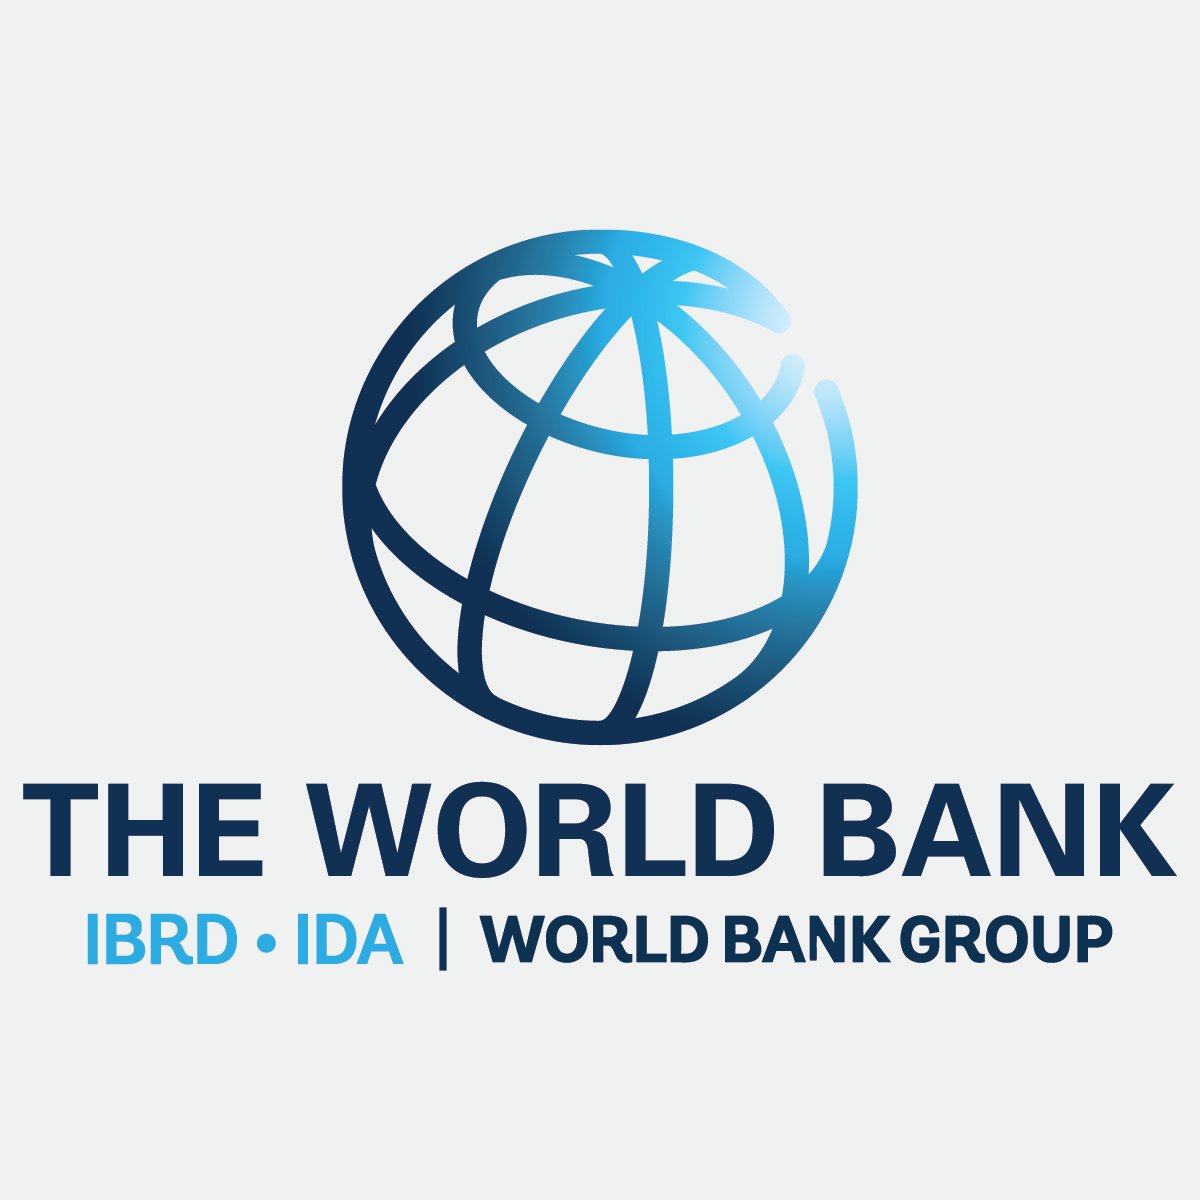 The world bank group